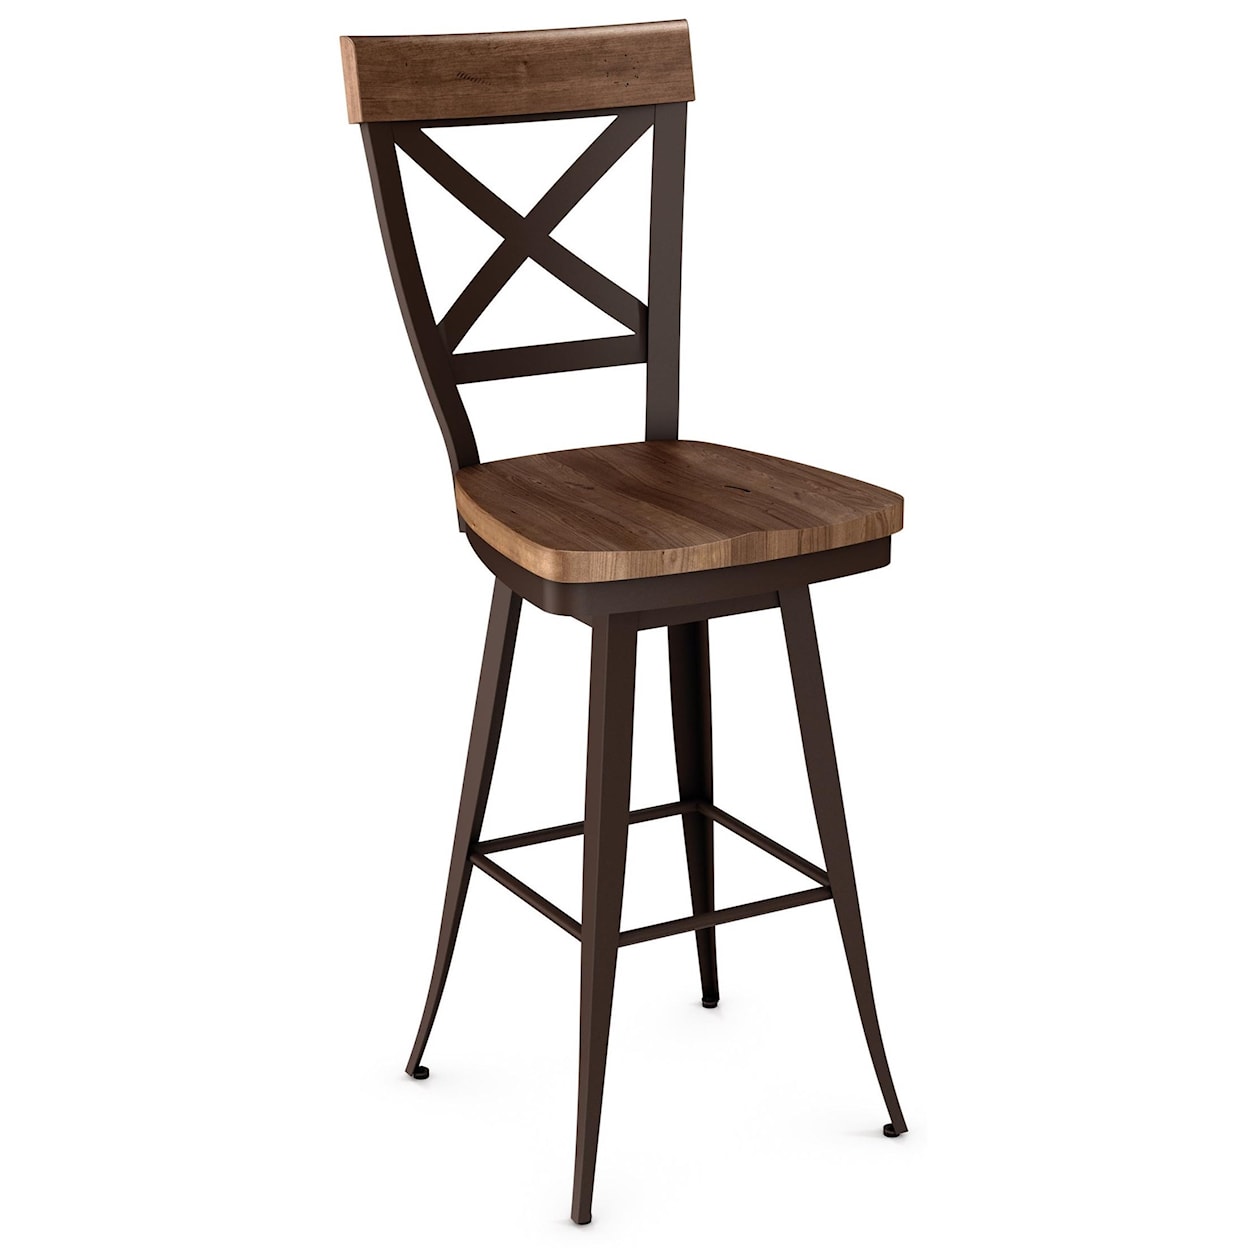 Amisco Industrial 26" Kyle Swivel Stool with Wood Seat